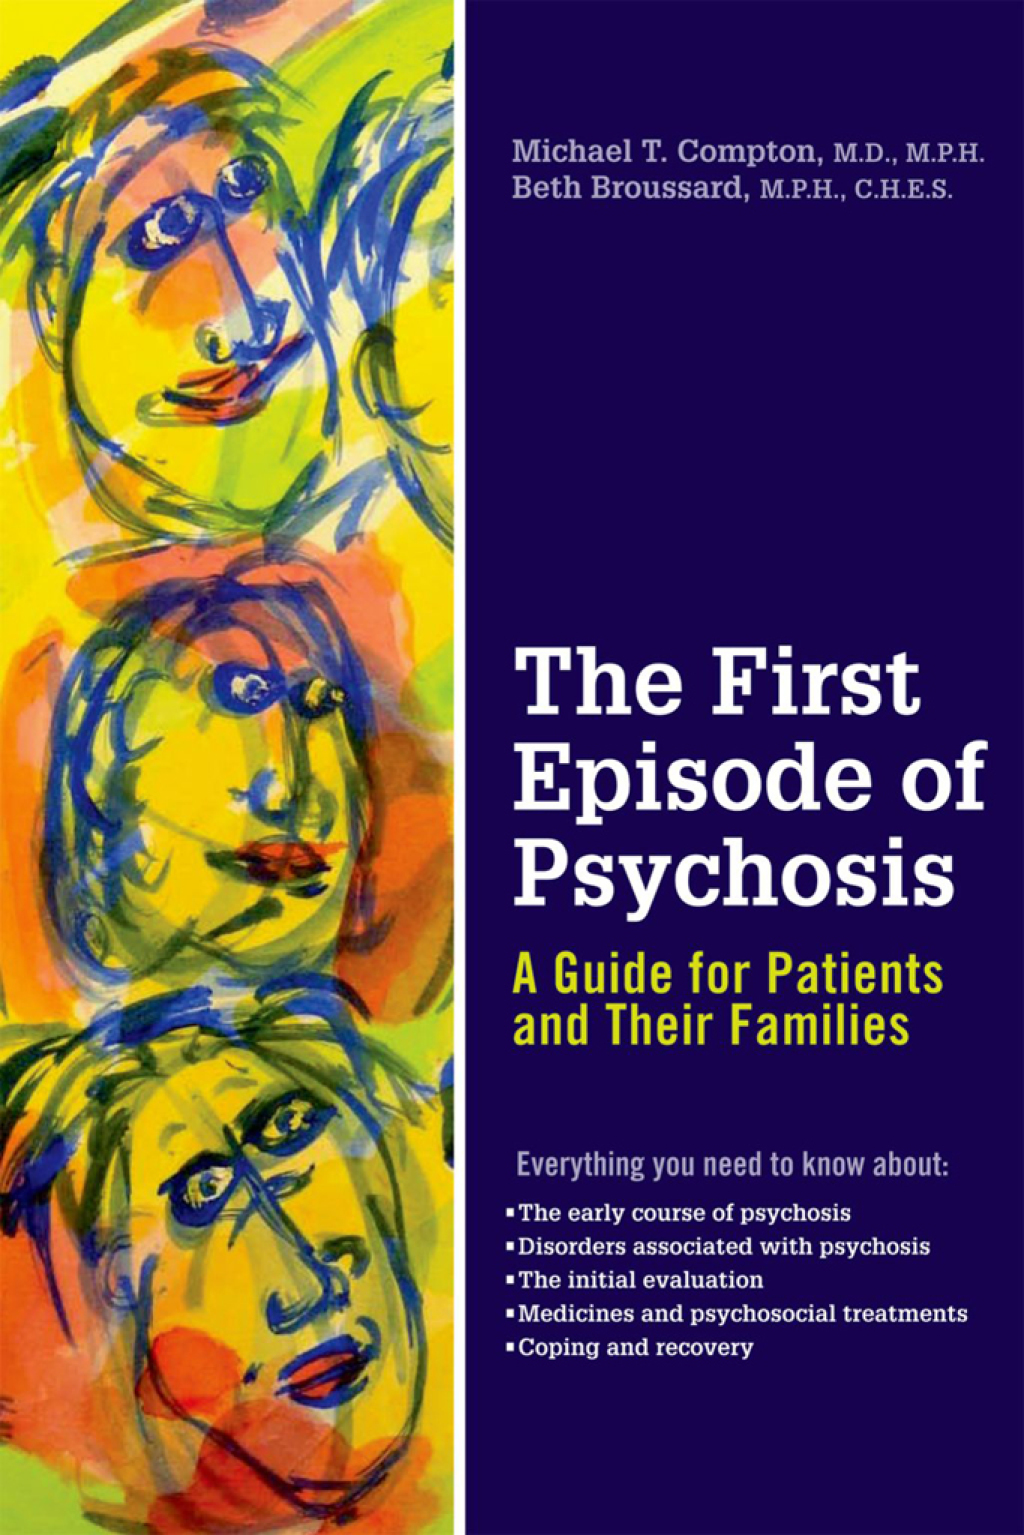 The First Episode of Psychosis (eBook Rental) - Michael T Compton; Beth Broussard,